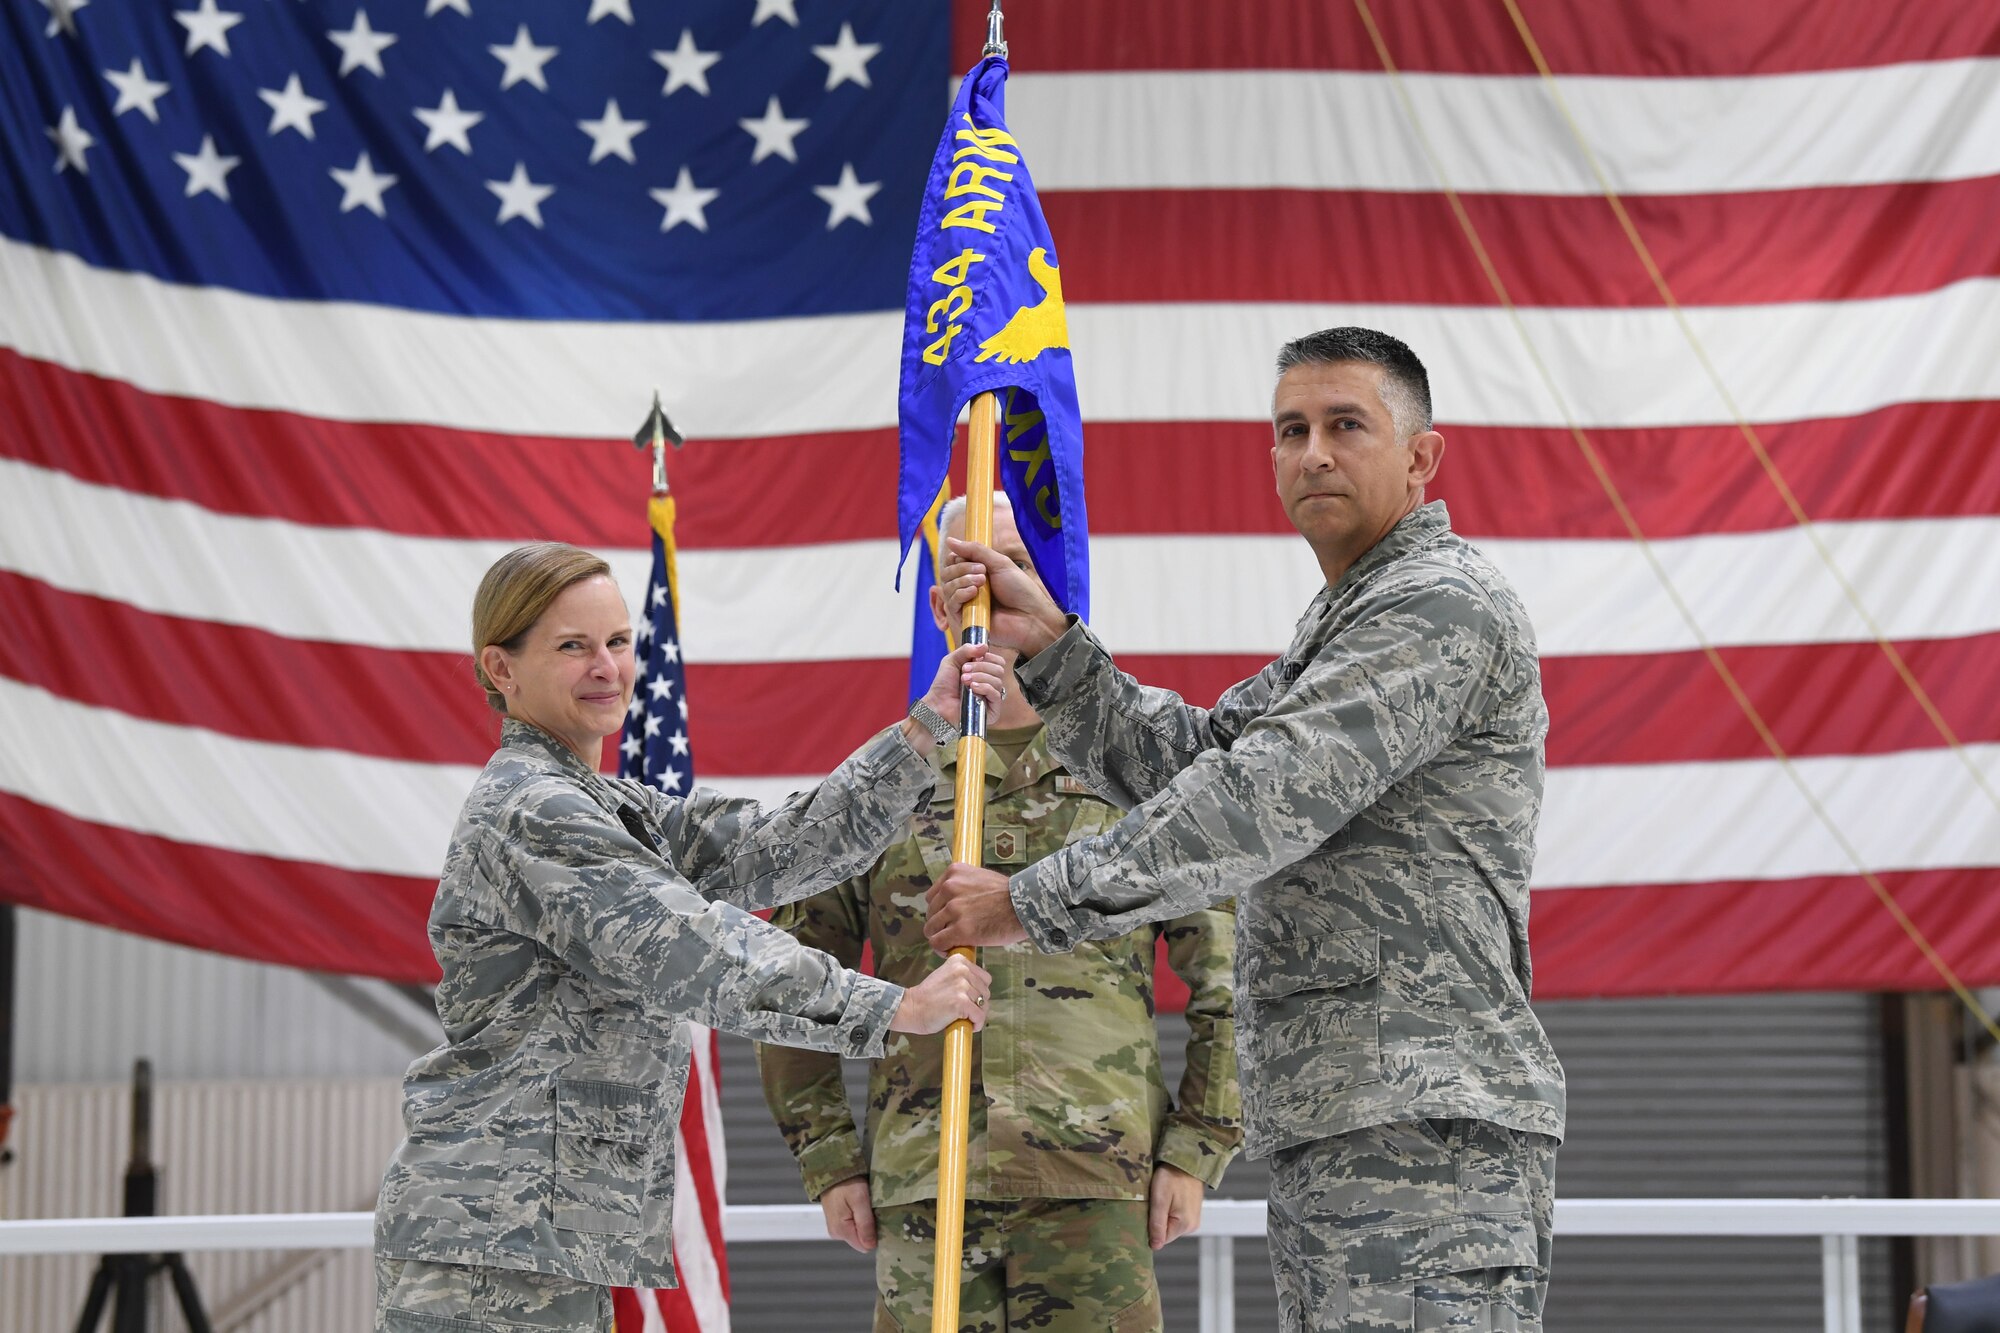 Lt. Col. John Valdes, former 434th Aircraft Maintenance Squadron commander, symbolically presents a guidon to Col. Arianne Mayberry, 434th Maintenance Group commander, during a change of command ceremony at Grissom Air Reserve Base, Oct. 4, 2020. Valdes held the position for the past 5 years. (U.S. Air Force photo / A1C Harrison Withrow)